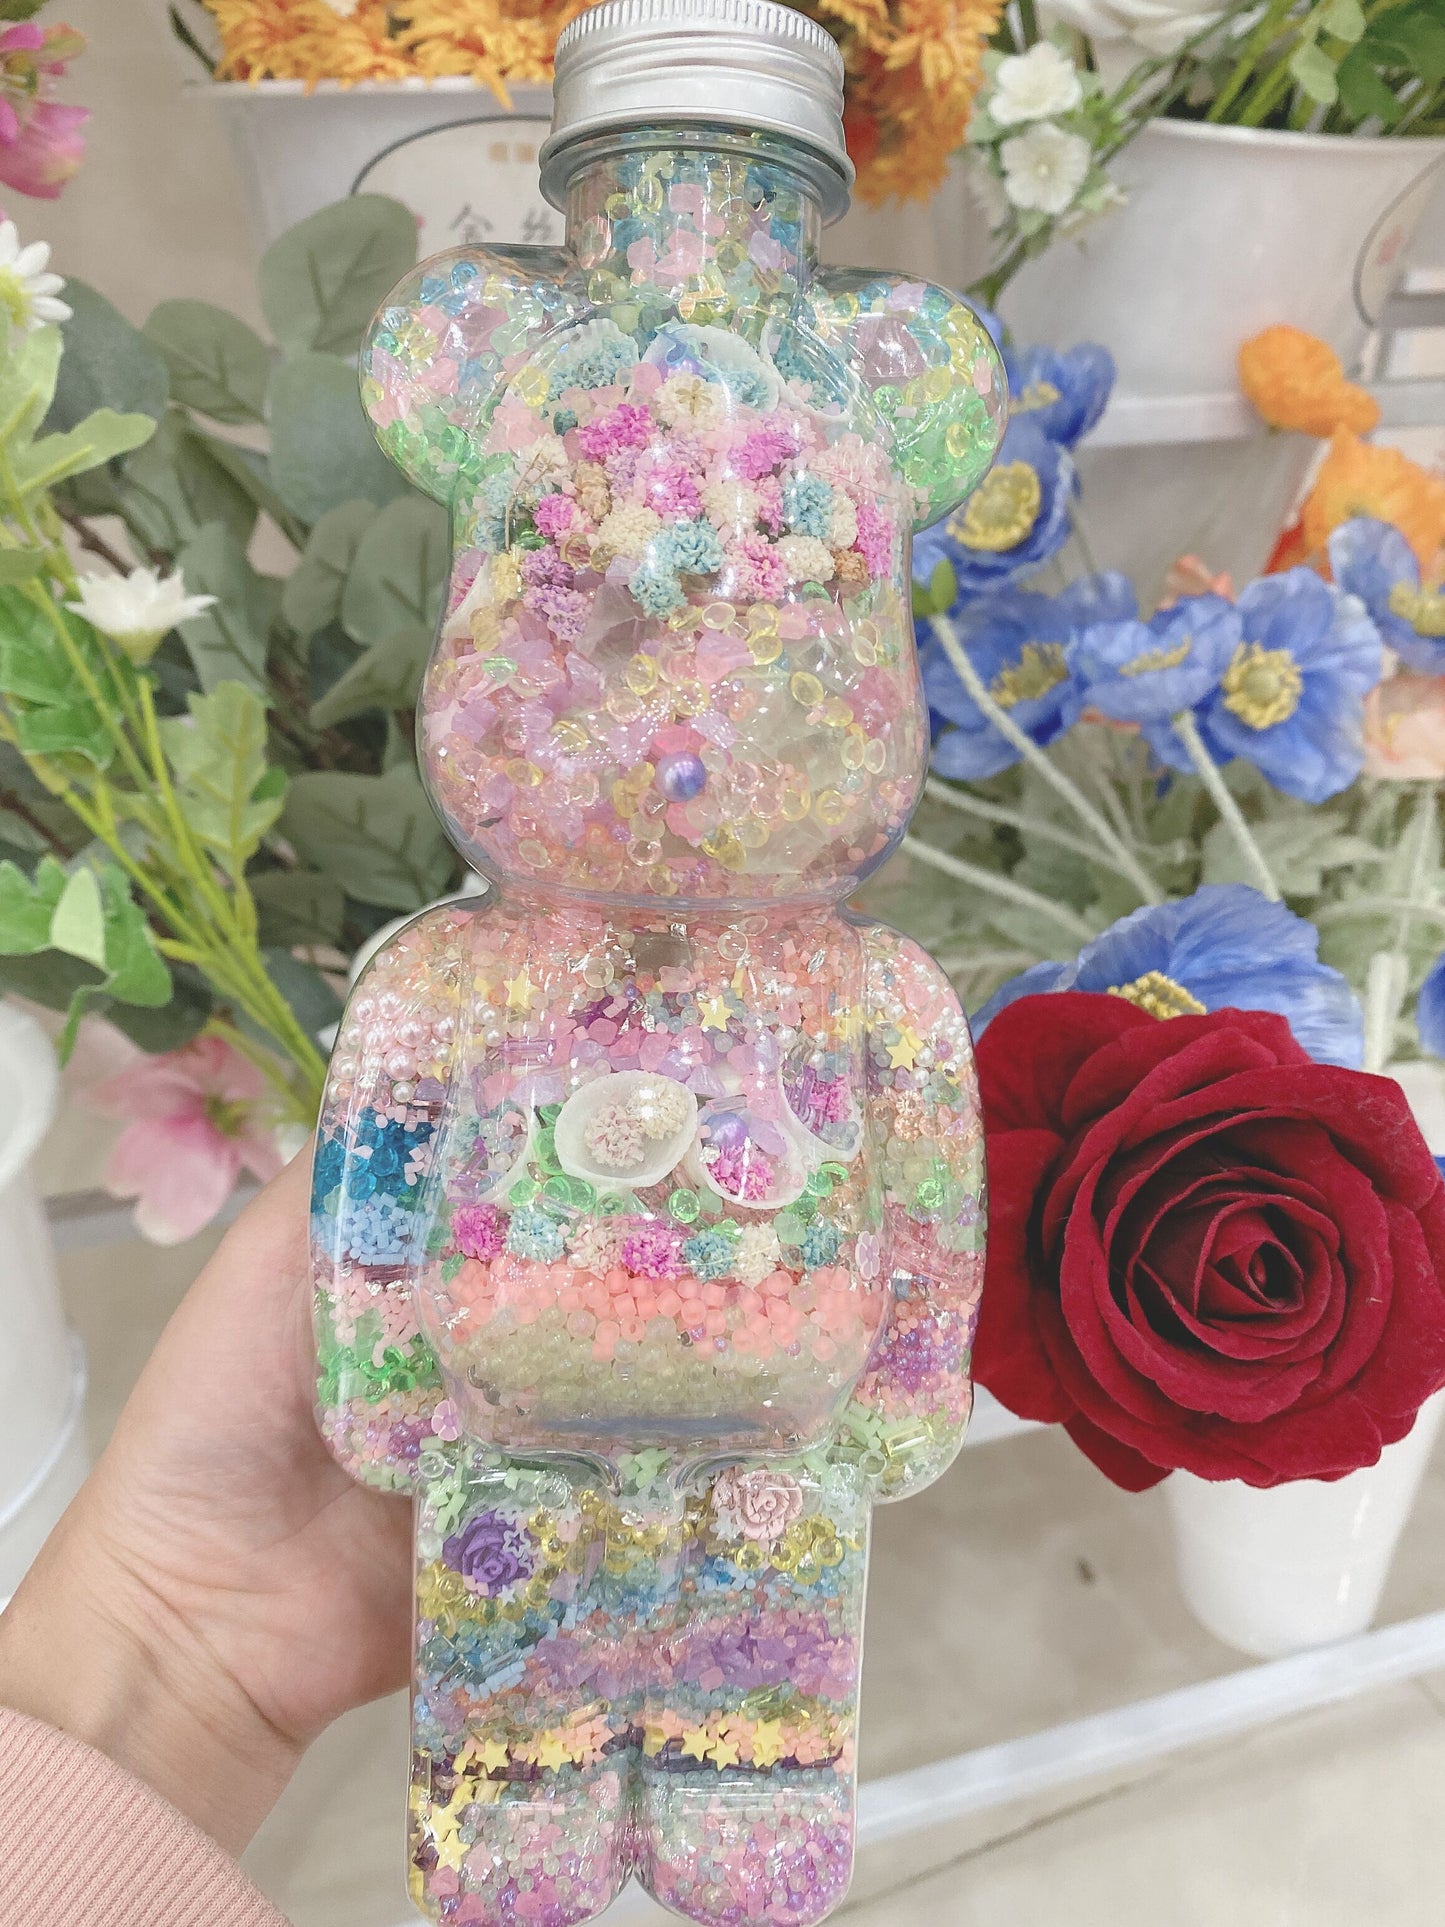 700ml Bear Colorful Spring Appointment Themed Gifts | Birthday Gifts for Women | Desk Decorations | Home Decor | Decorative Ornaments for Living Room, Bedroom, Office Desktop, Cabinets